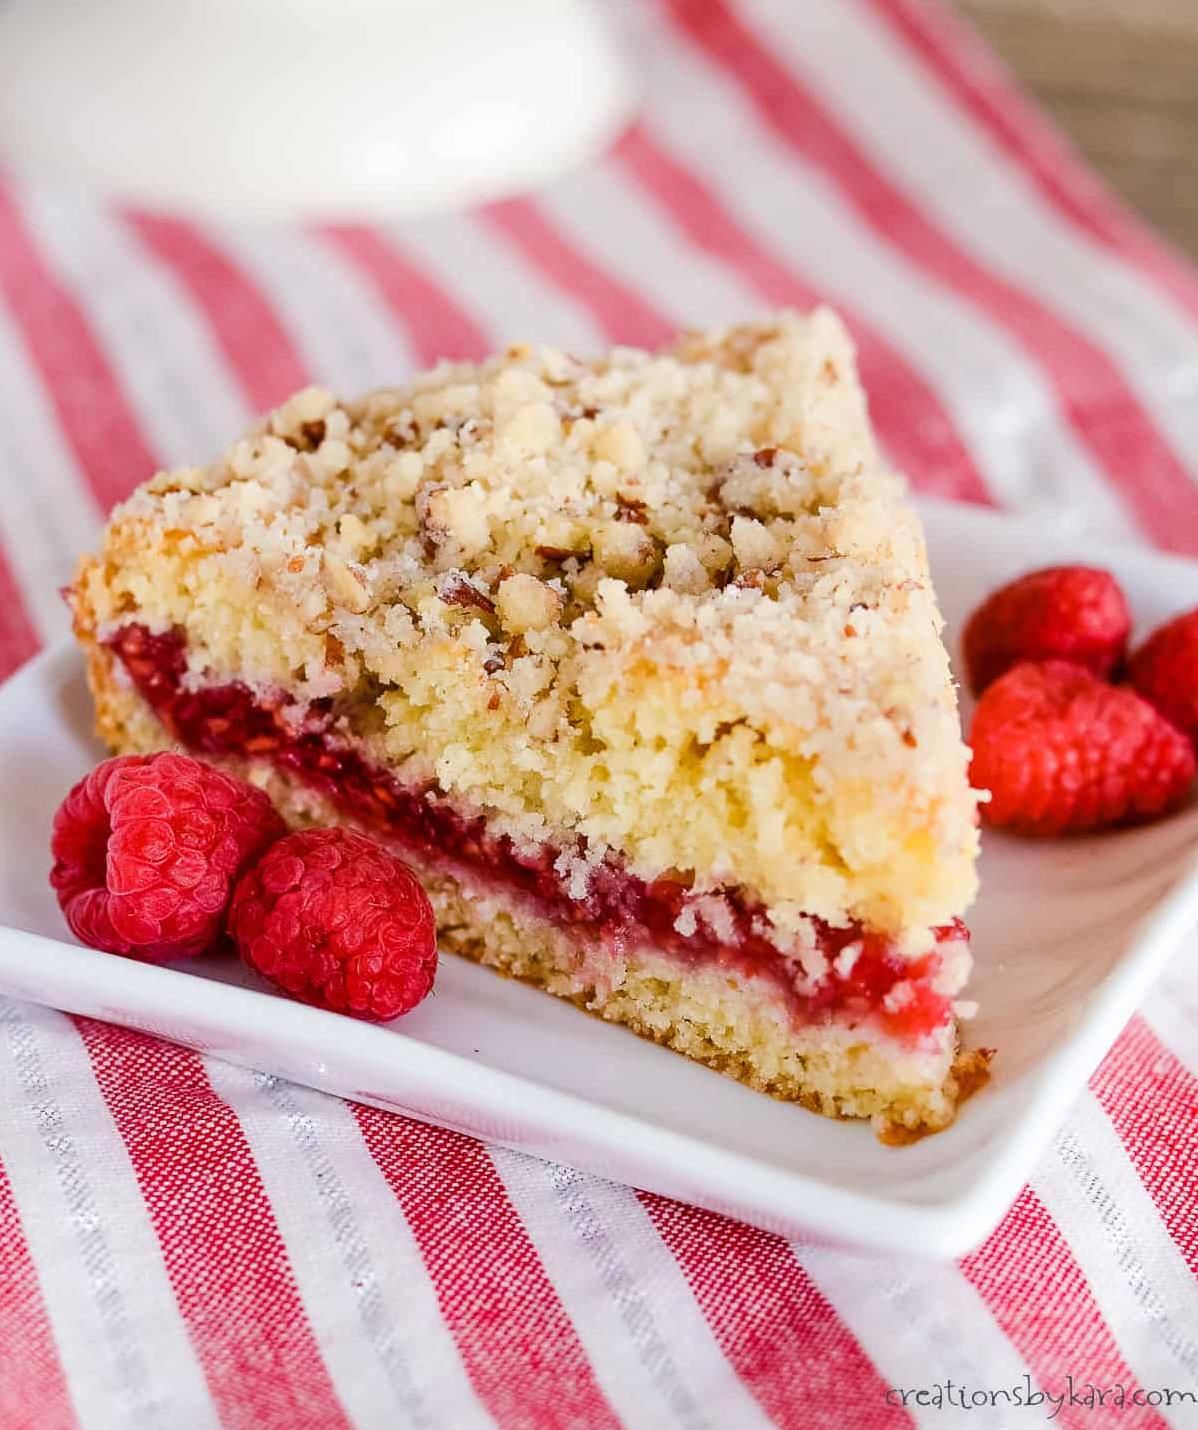  Satisfy your sweet tooth with this Raspberry Coffee Pie